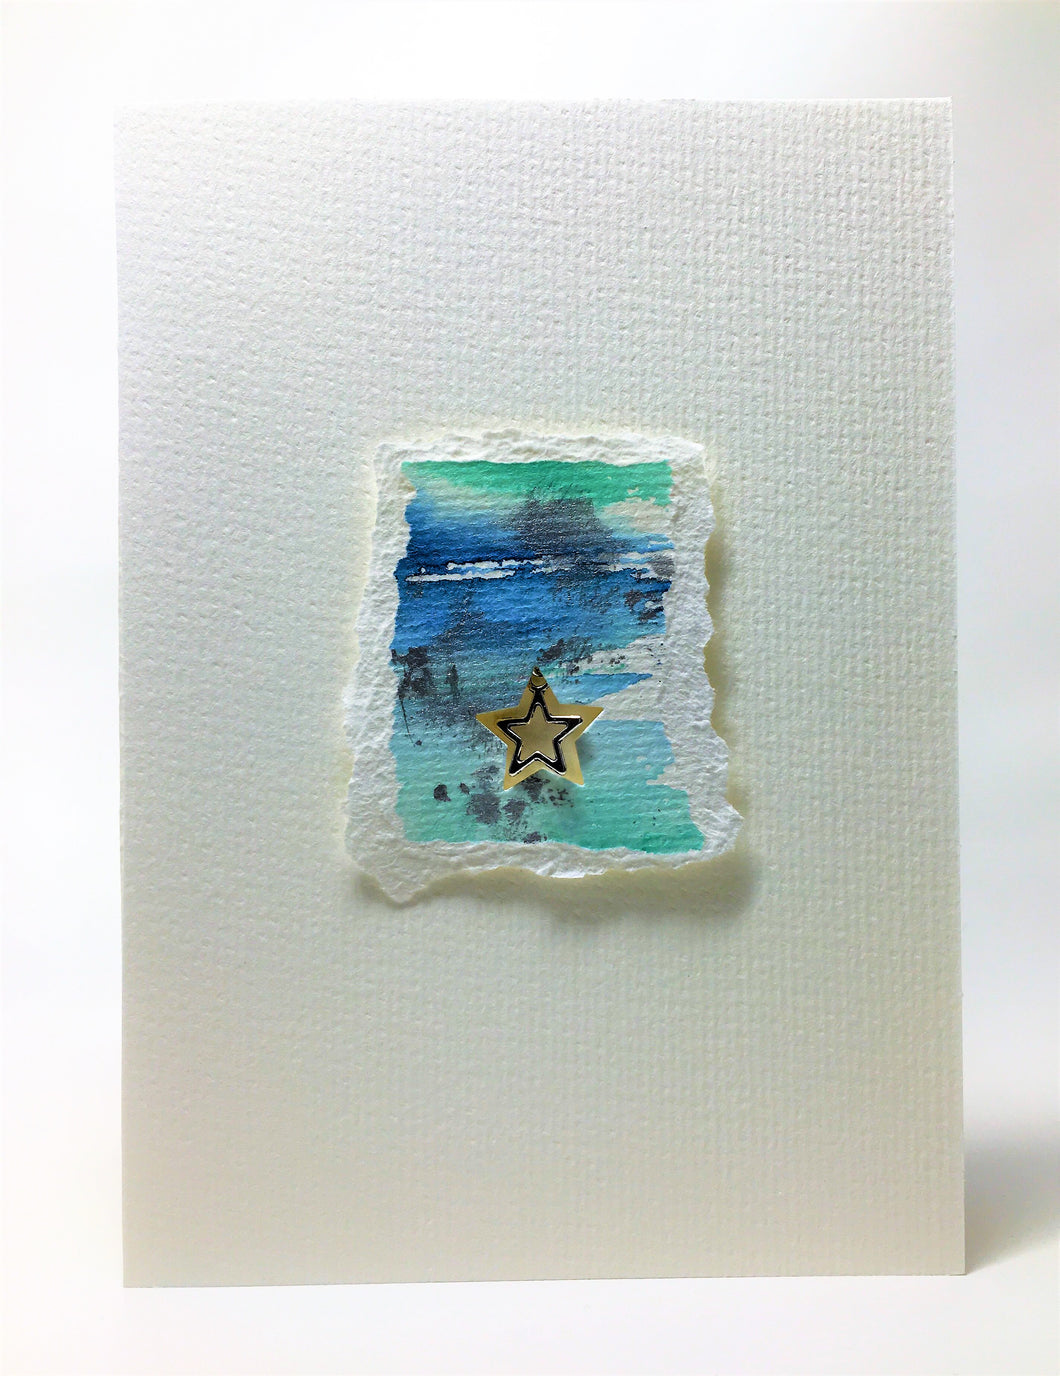 Original Handcrafted Christmas Card - Star Collection - Blue, Jade and Silver Abstract with Star - eDgE dEsiGn London